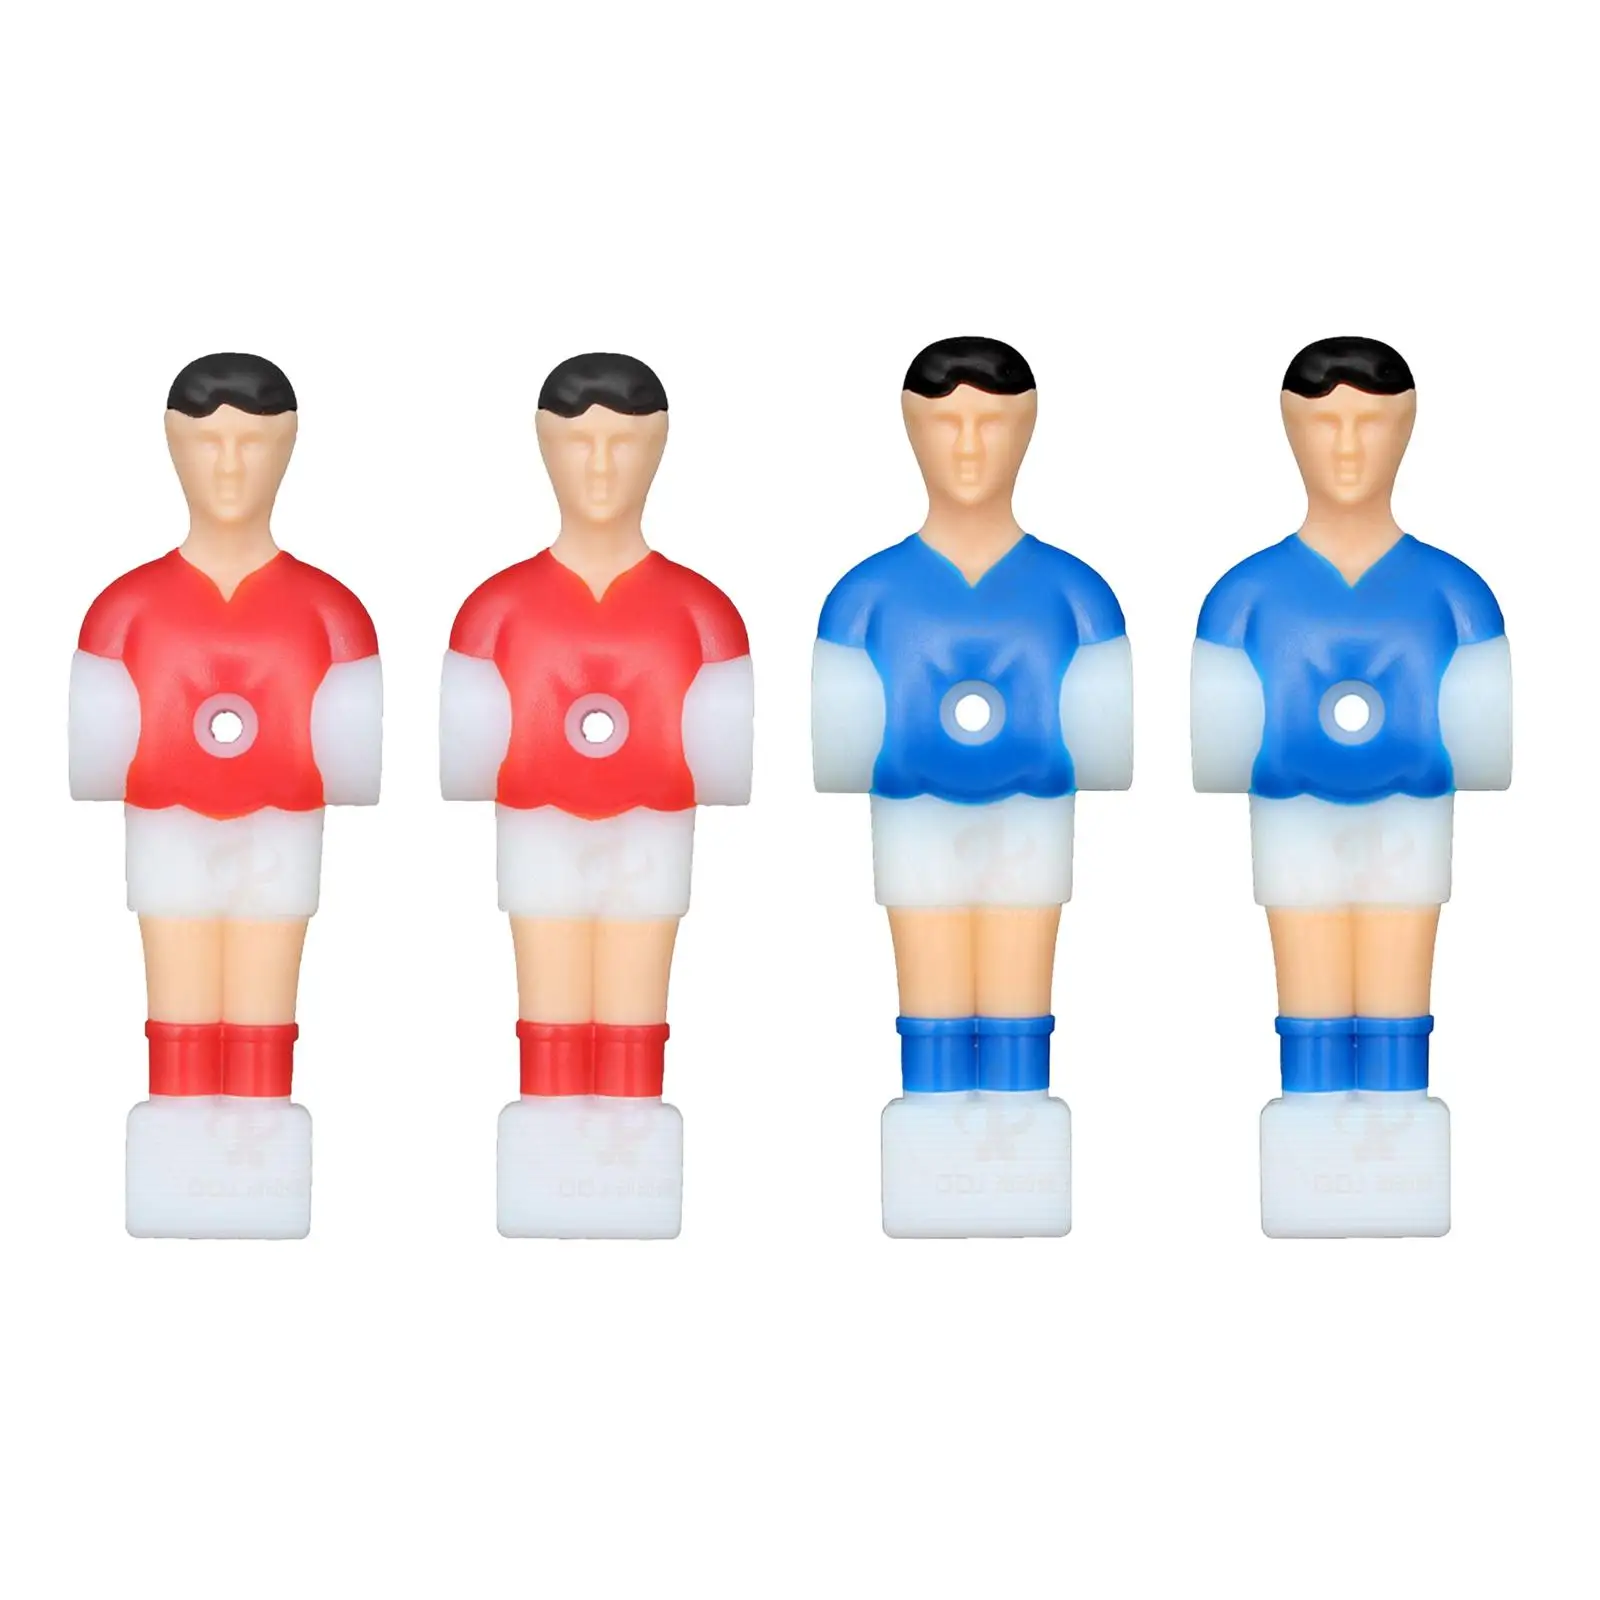 4Pcs Foosball Men Table Foosball Player Replacement Parts Table Football Men Mini Doll Table Football Machine Accessory Parts